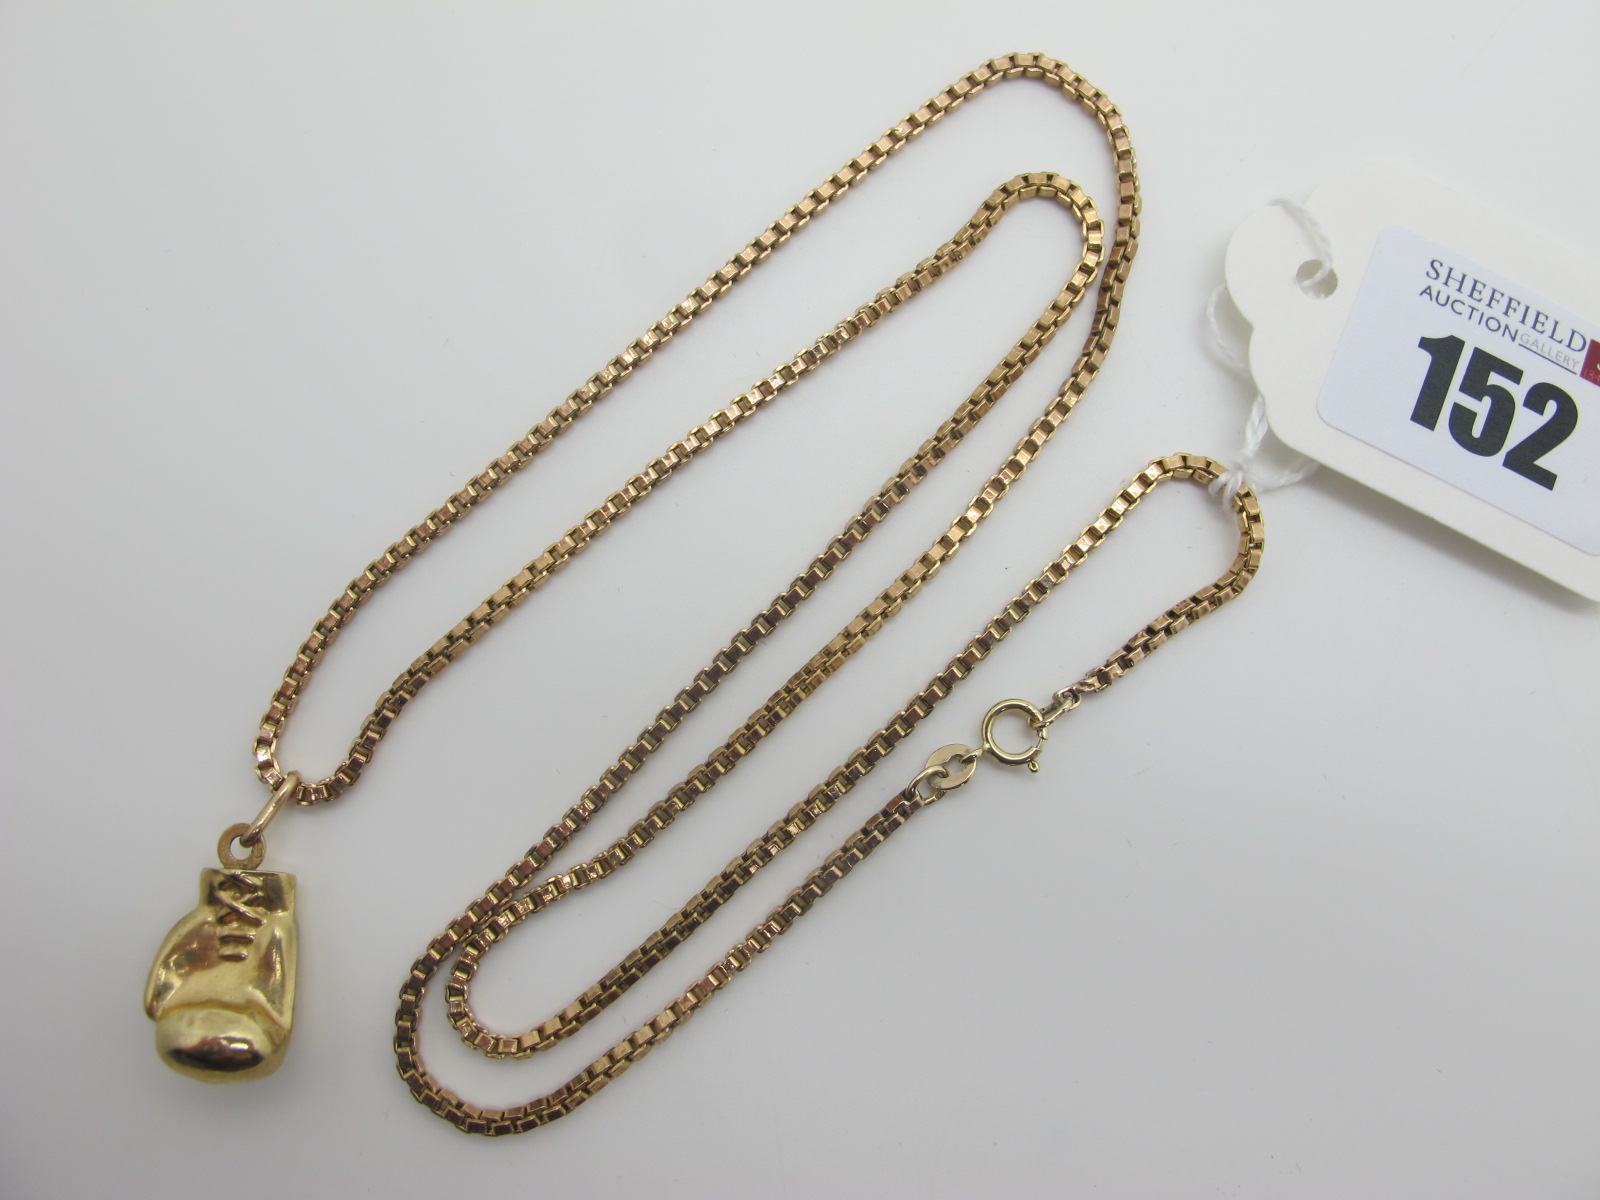 A Box Link Chain, stamped "375", suspending a boxing glove pendant.